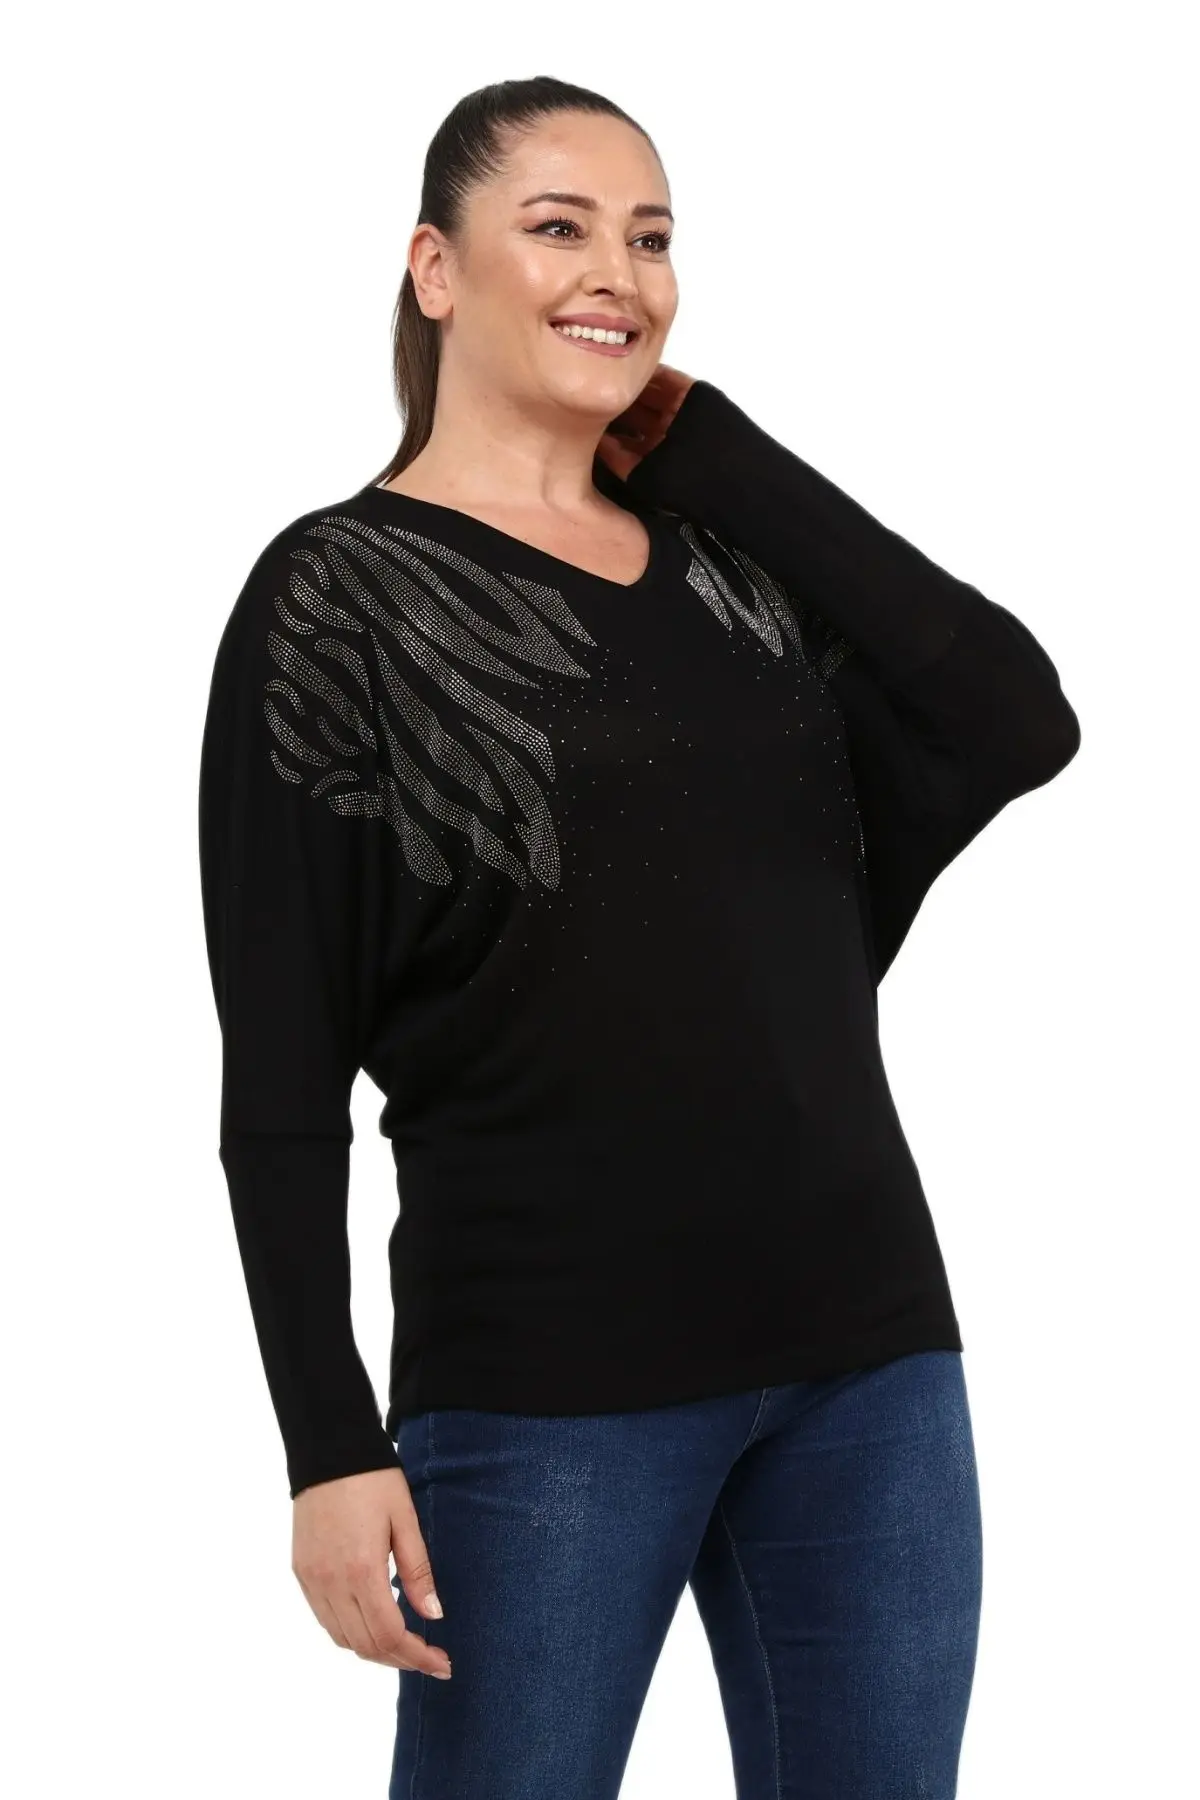 

Women’s Plus Size Black Blouse V-Neck Bat Arm Silver Stone Detail, Designed and Made in Turkey, New Arrival